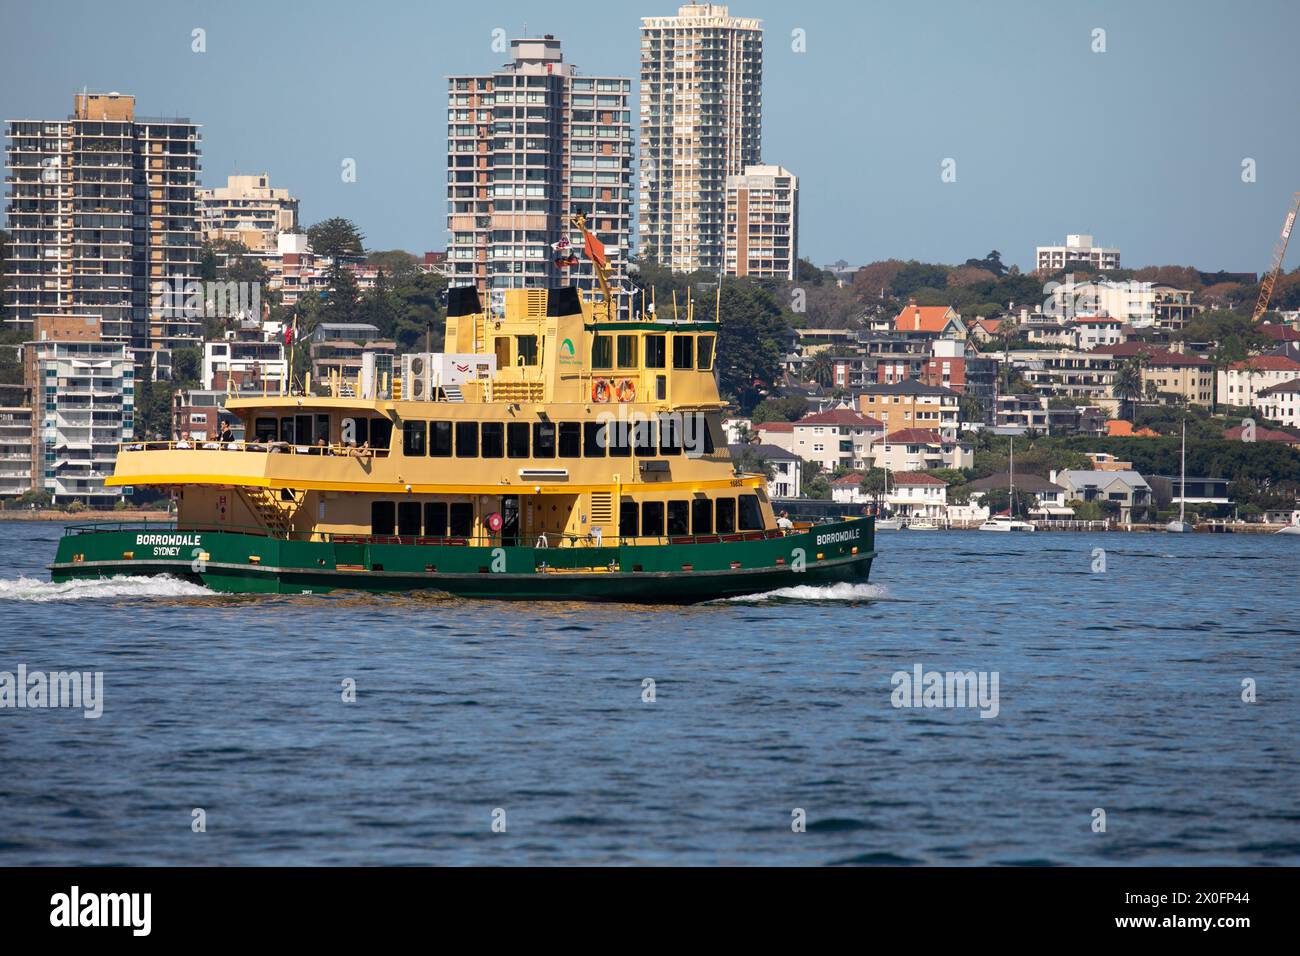 Sydney harbour and Sydney ferry MV Borrowdale, a first fleet class ferry, provides public transport service between ferry wharves on Sydney harbour Stock Photo